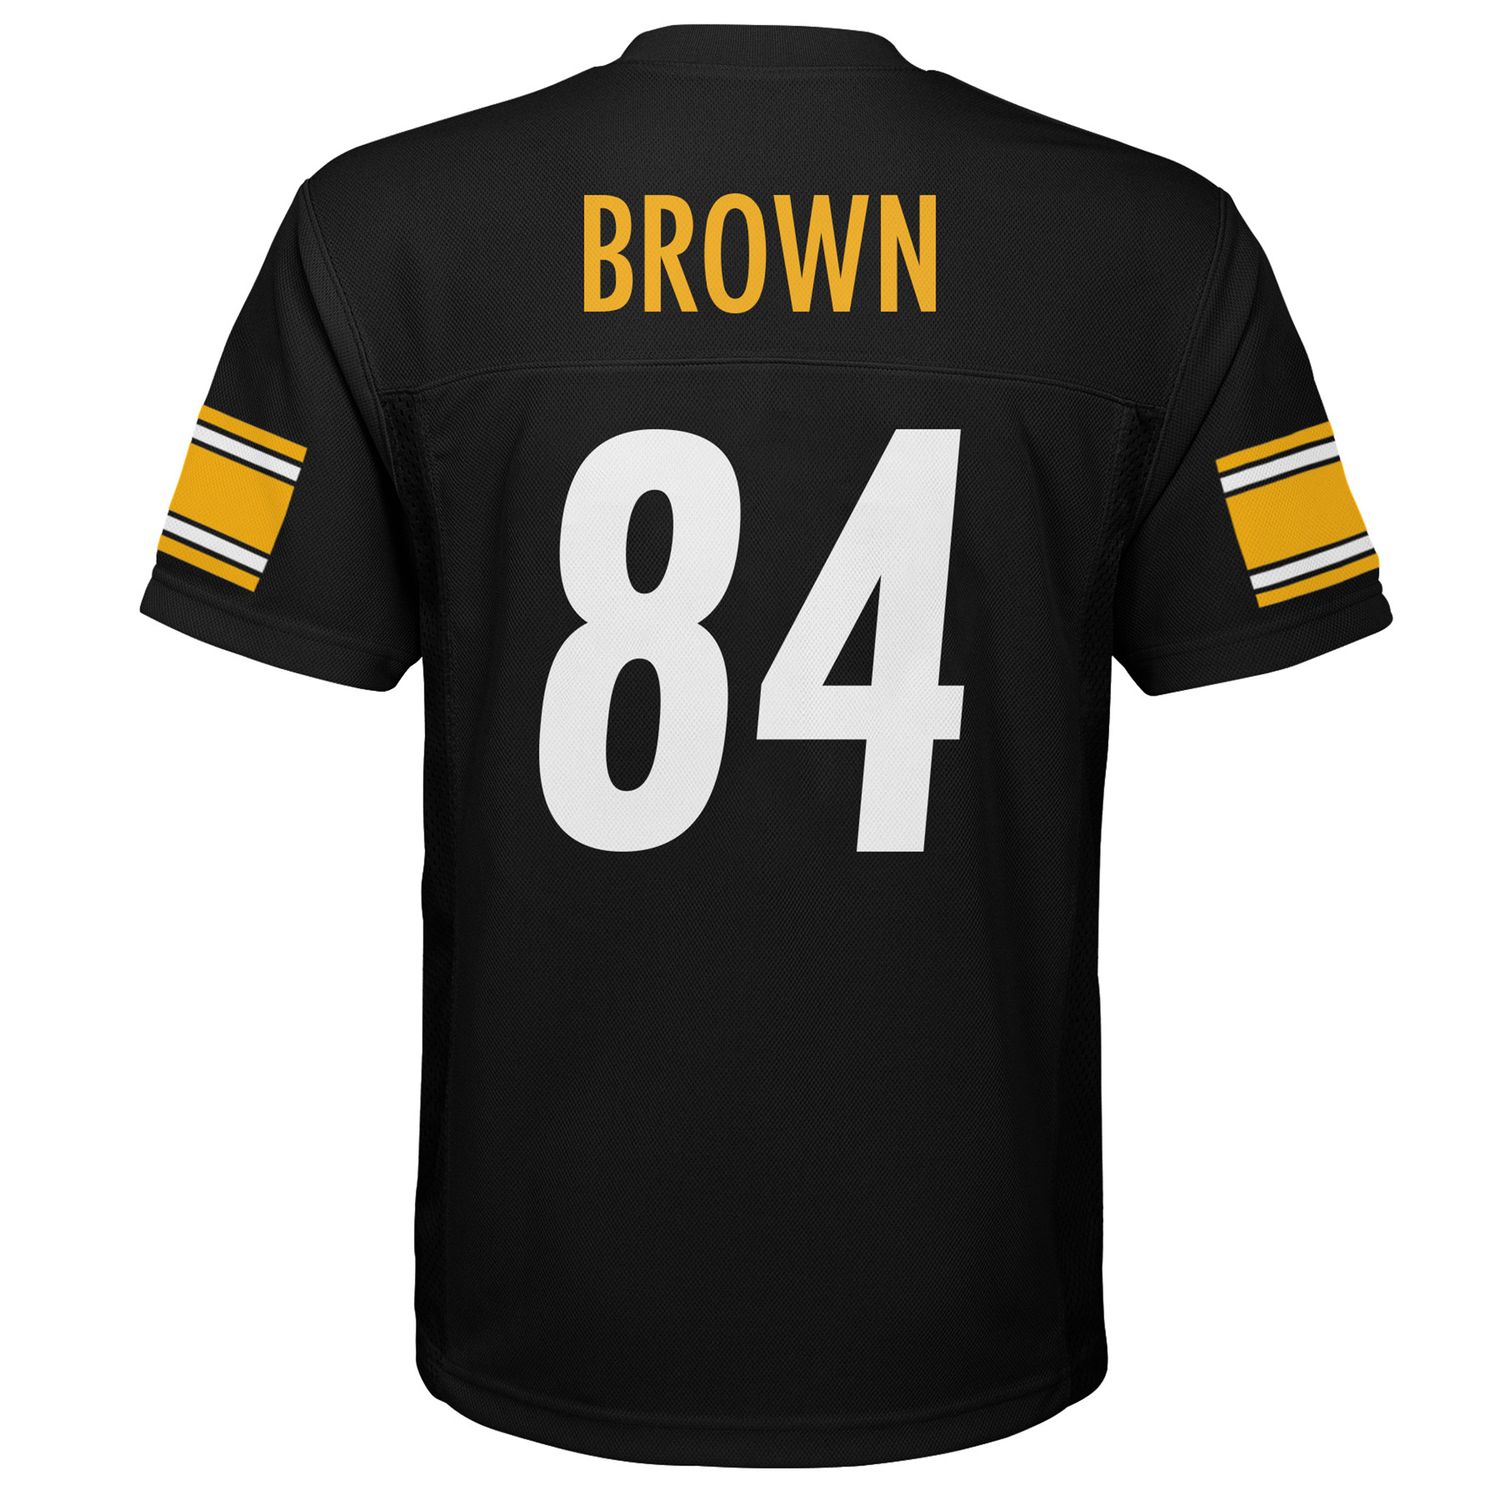 pittsburgh steelers jerseys for toddlers